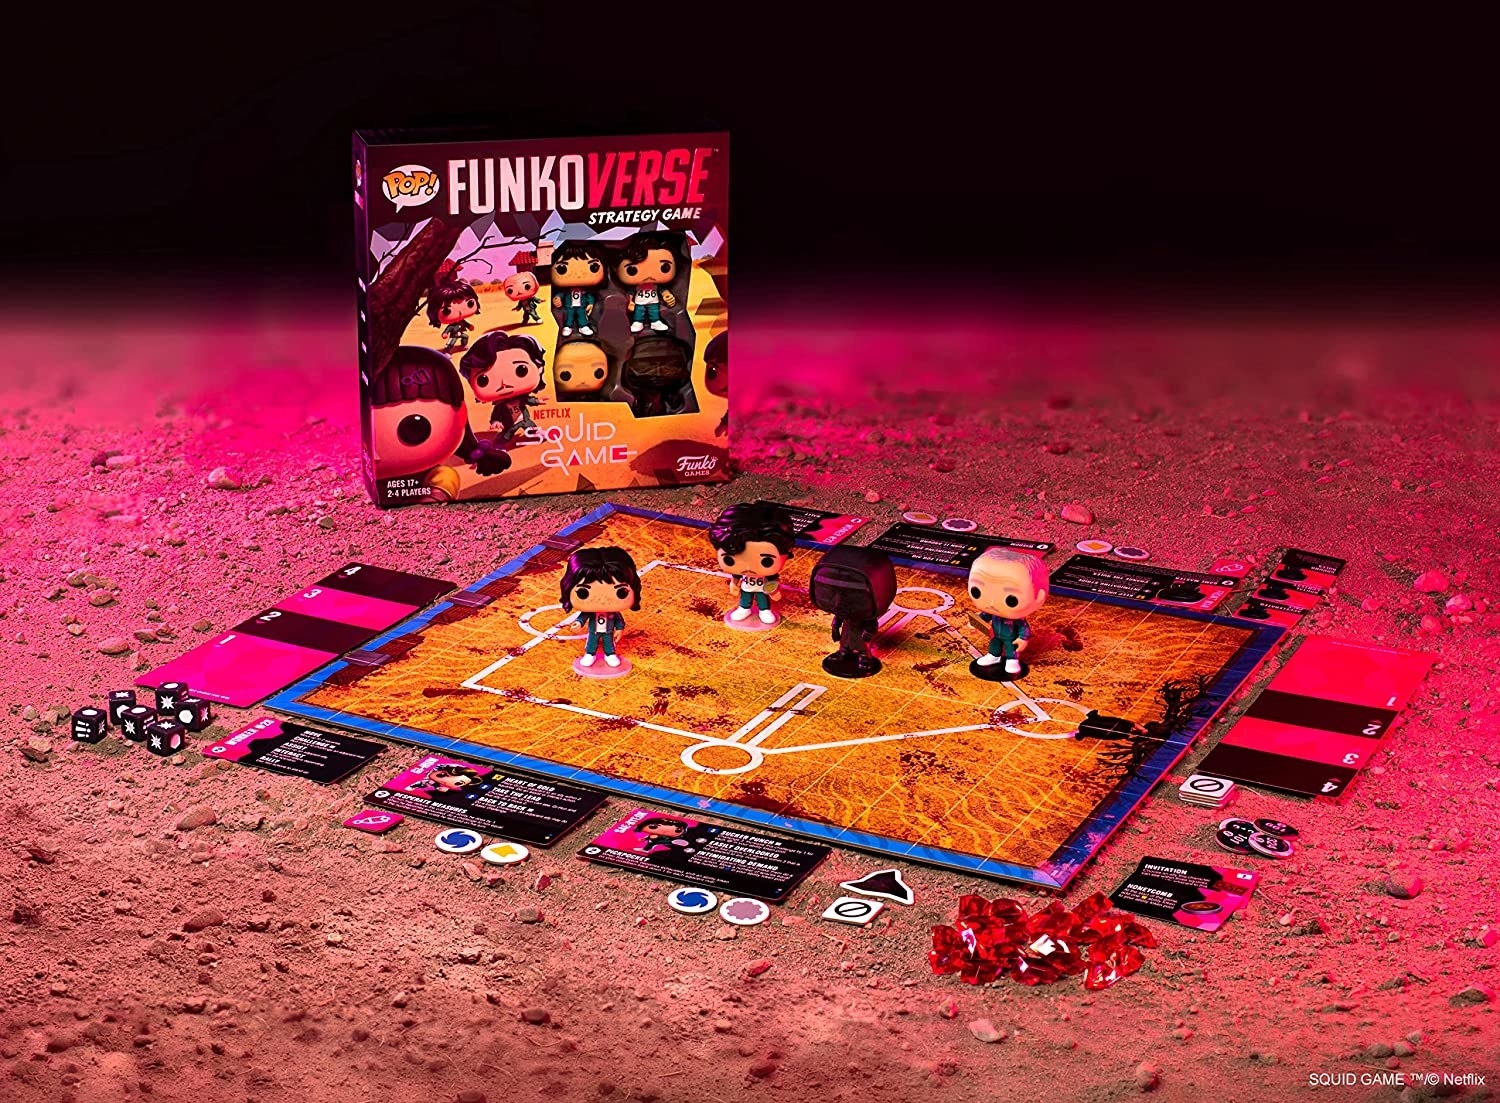 A boardgame that has the squidgame logo printed on it with lots of cards and pieces around the edge, and four of the funko characters on the board